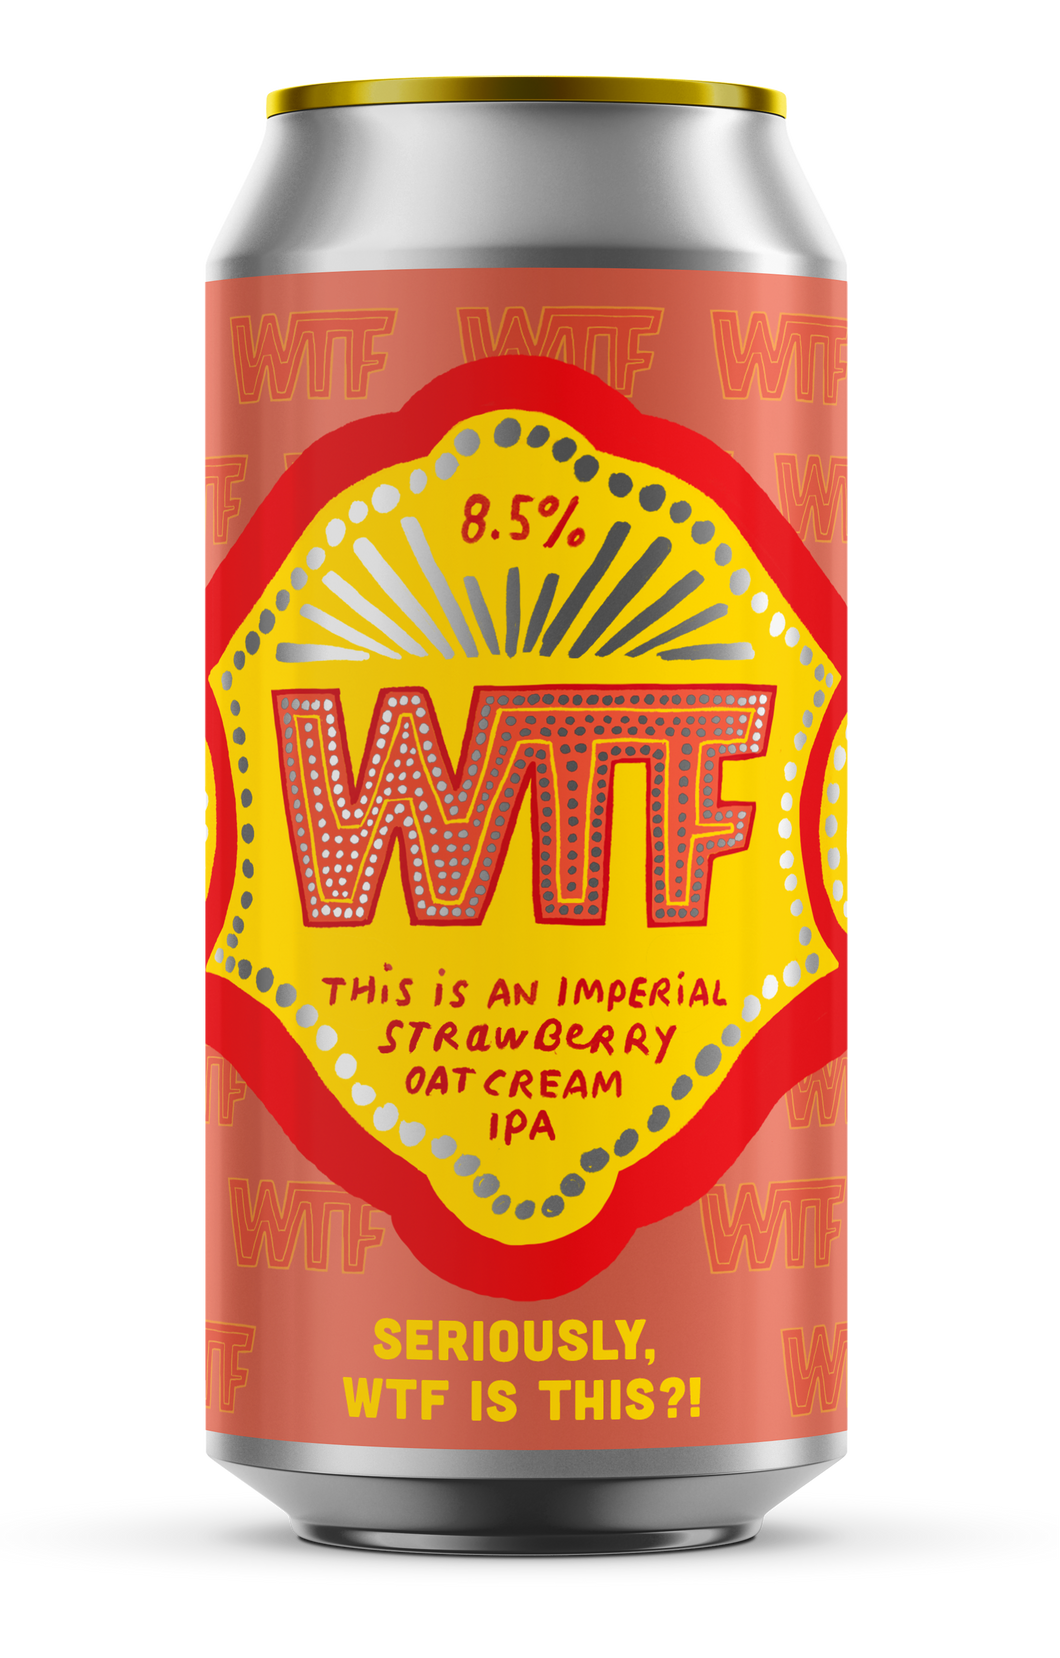 Seriously, WTF Is This? - Imperial Strawberry Oat Cream IPA (8.5%)